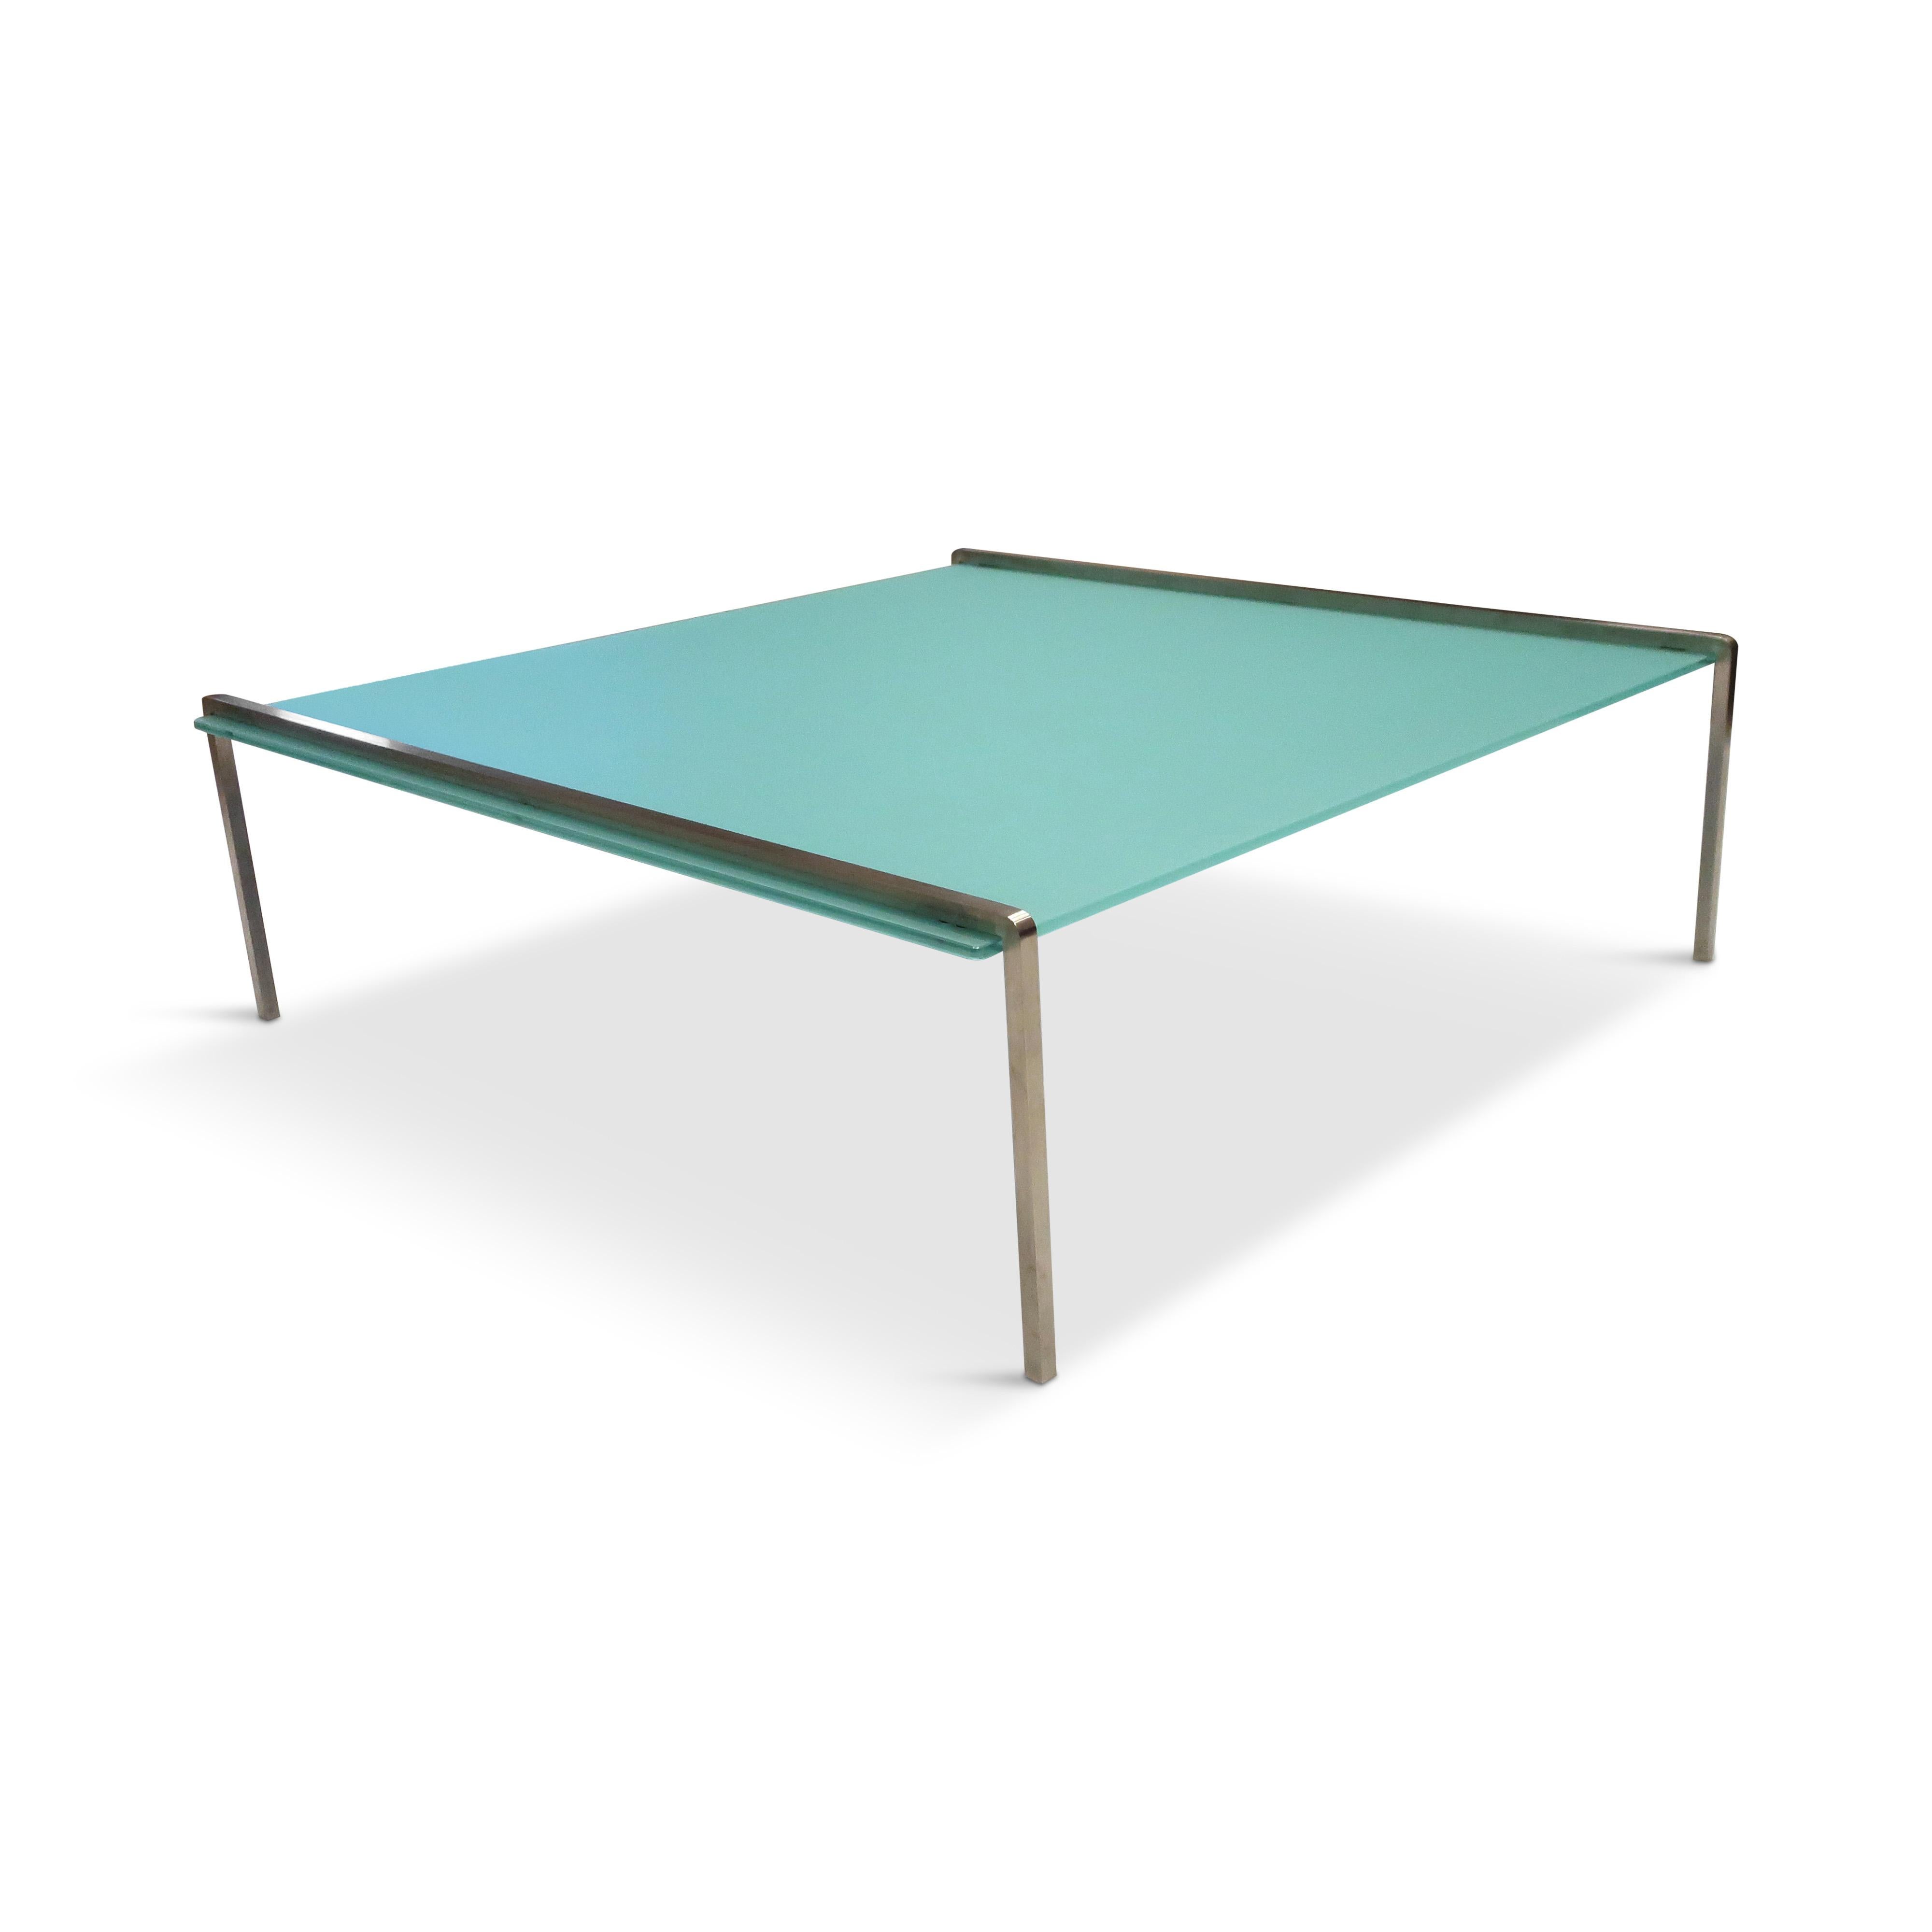 Post-Modern Ion Coffee Table by Konstantin Grcic for ClassiCon, '1997' For Sale